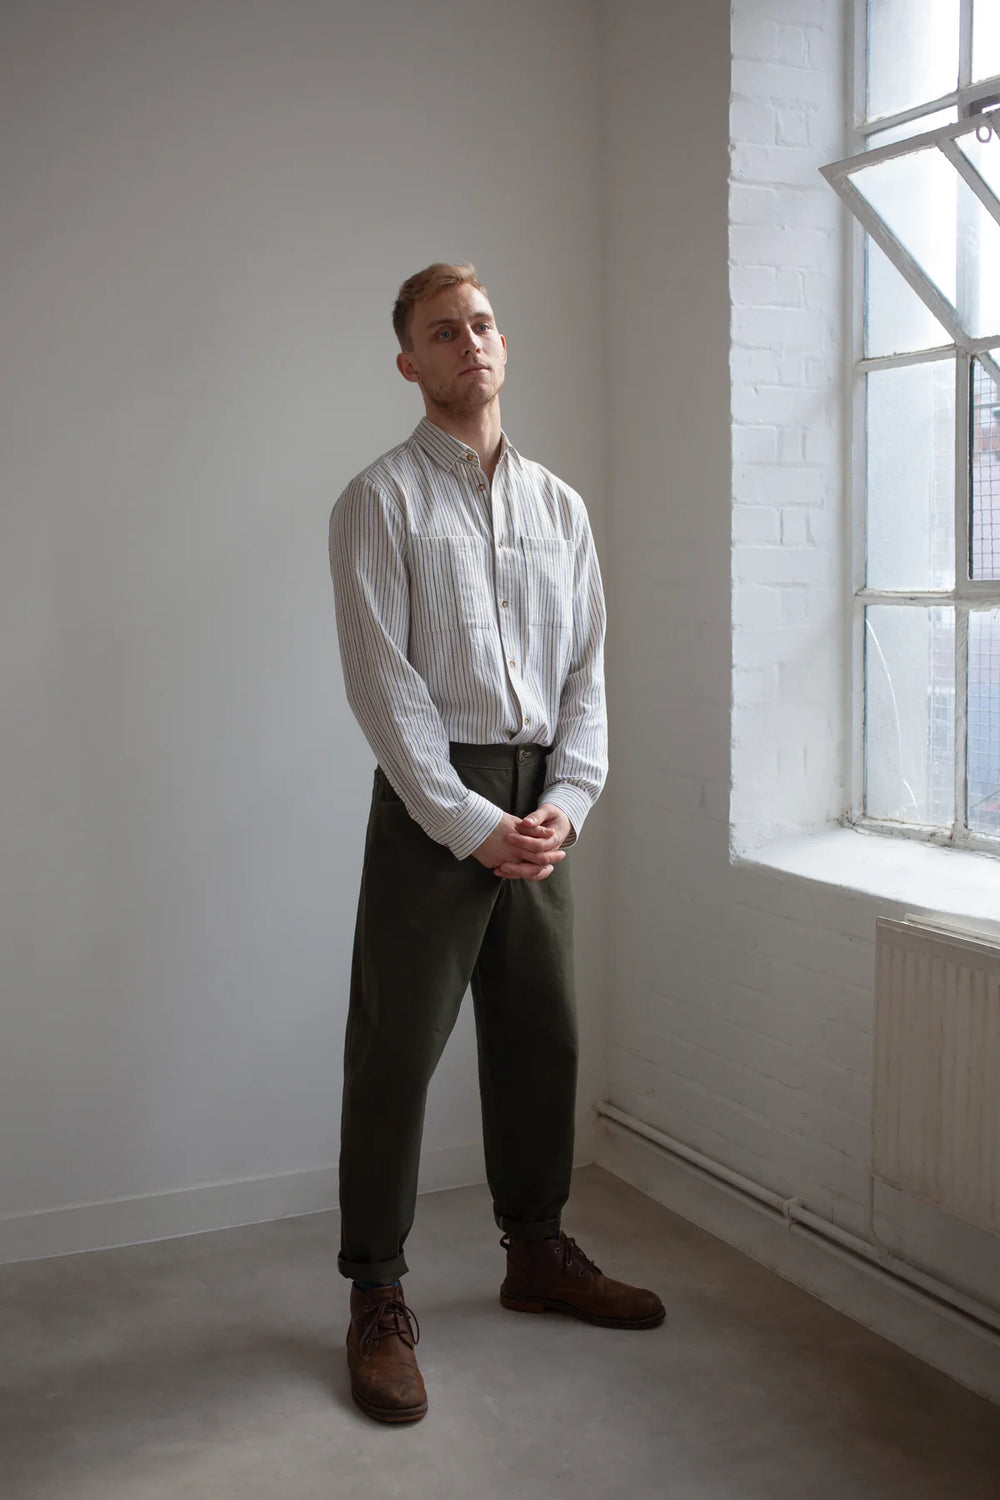 The Modern Sewing Co. Men's Worker Trousers